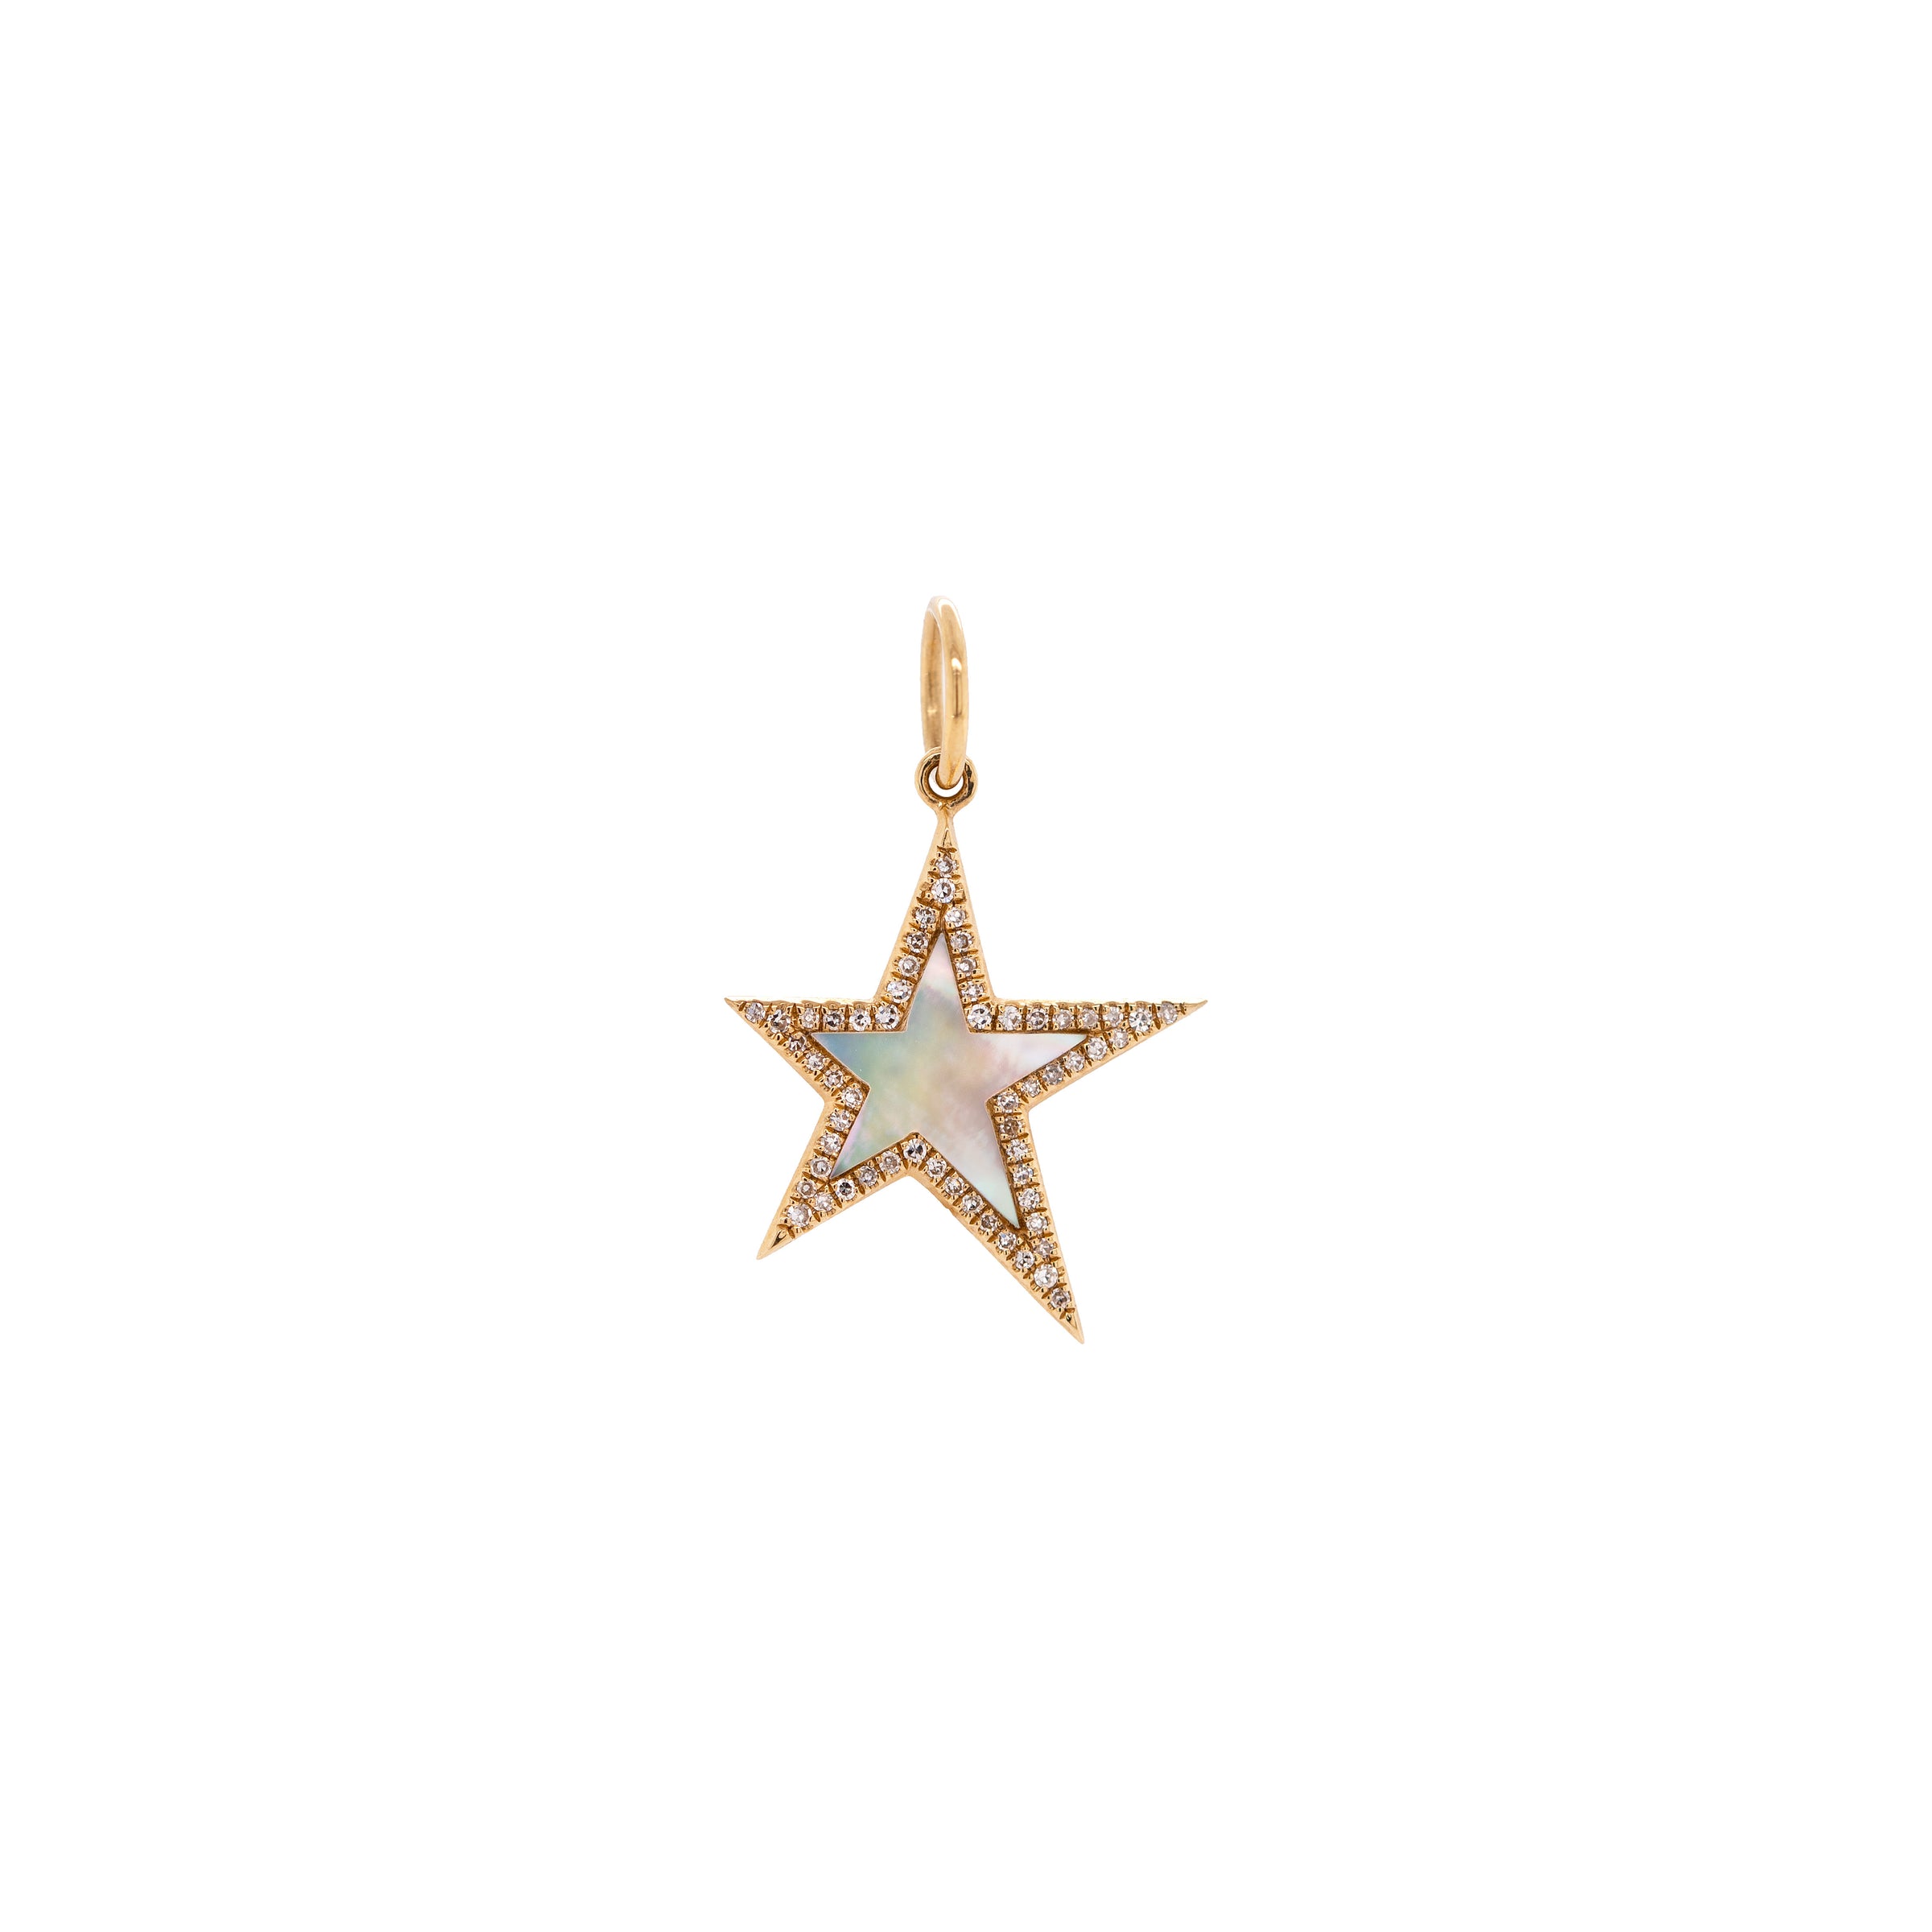 MOTHER-OF-PEARL STAR PENDANT